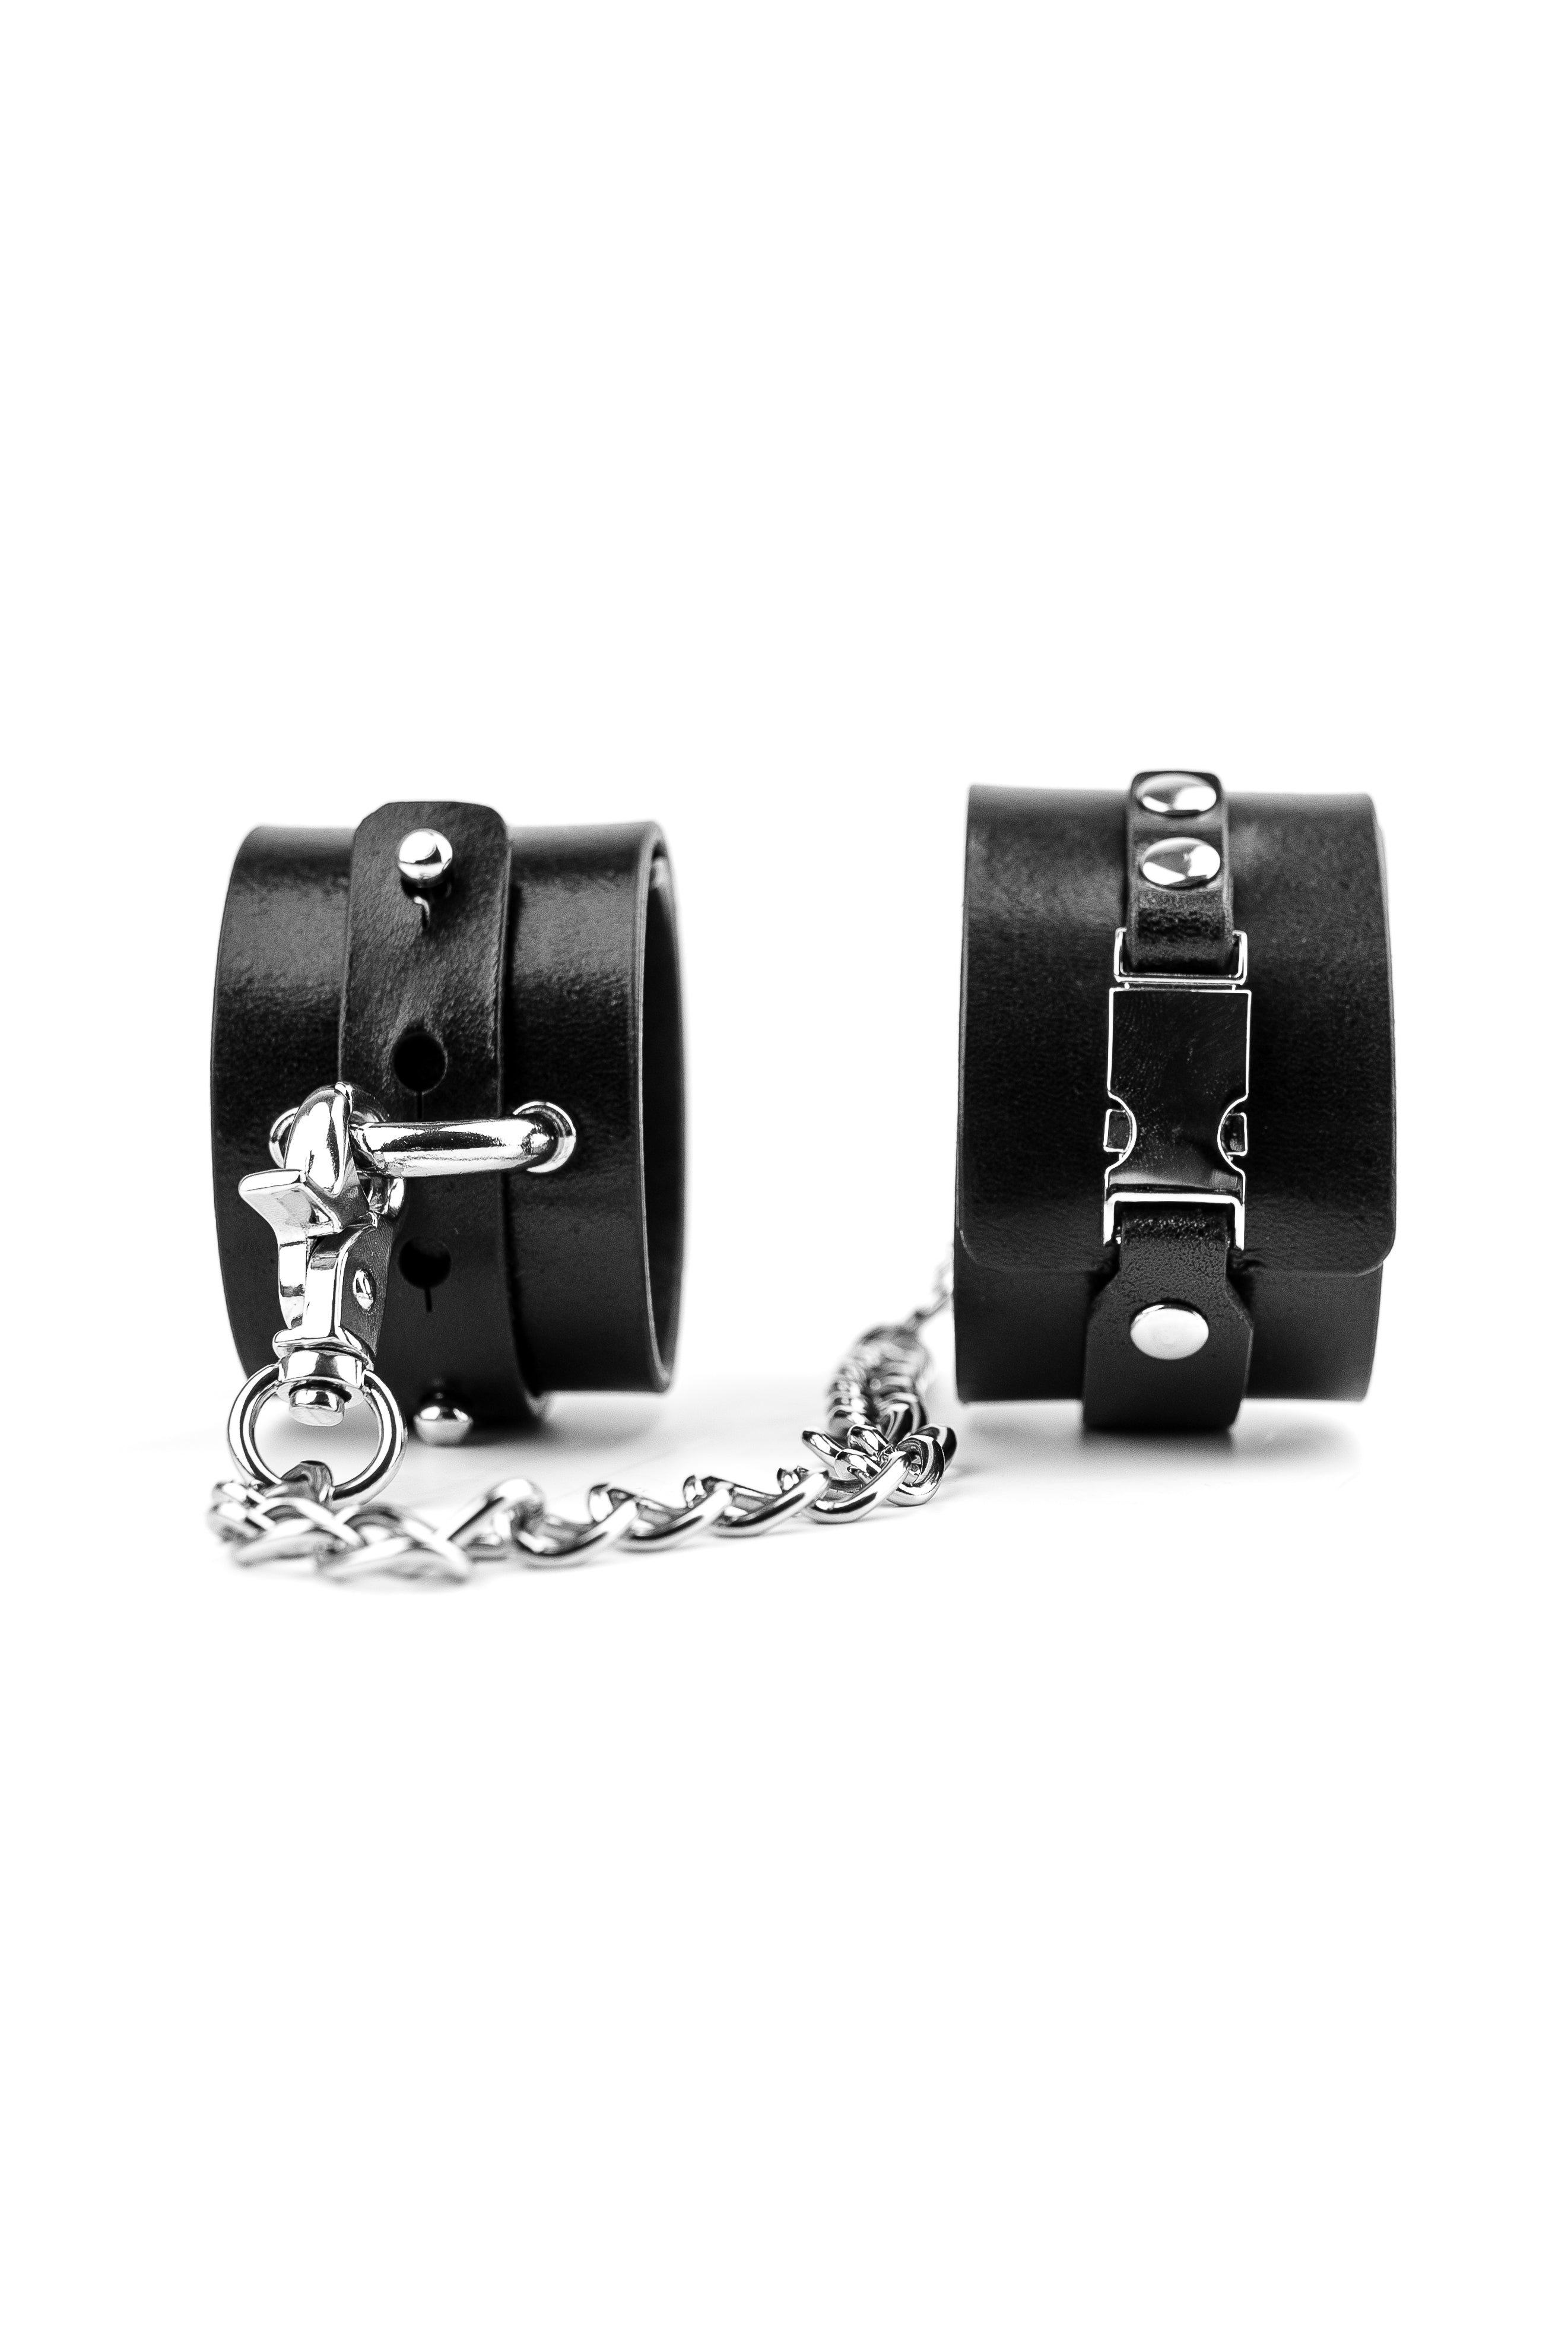 “Fast X me up” Handcuffs, Ankle cuffs with chain connector